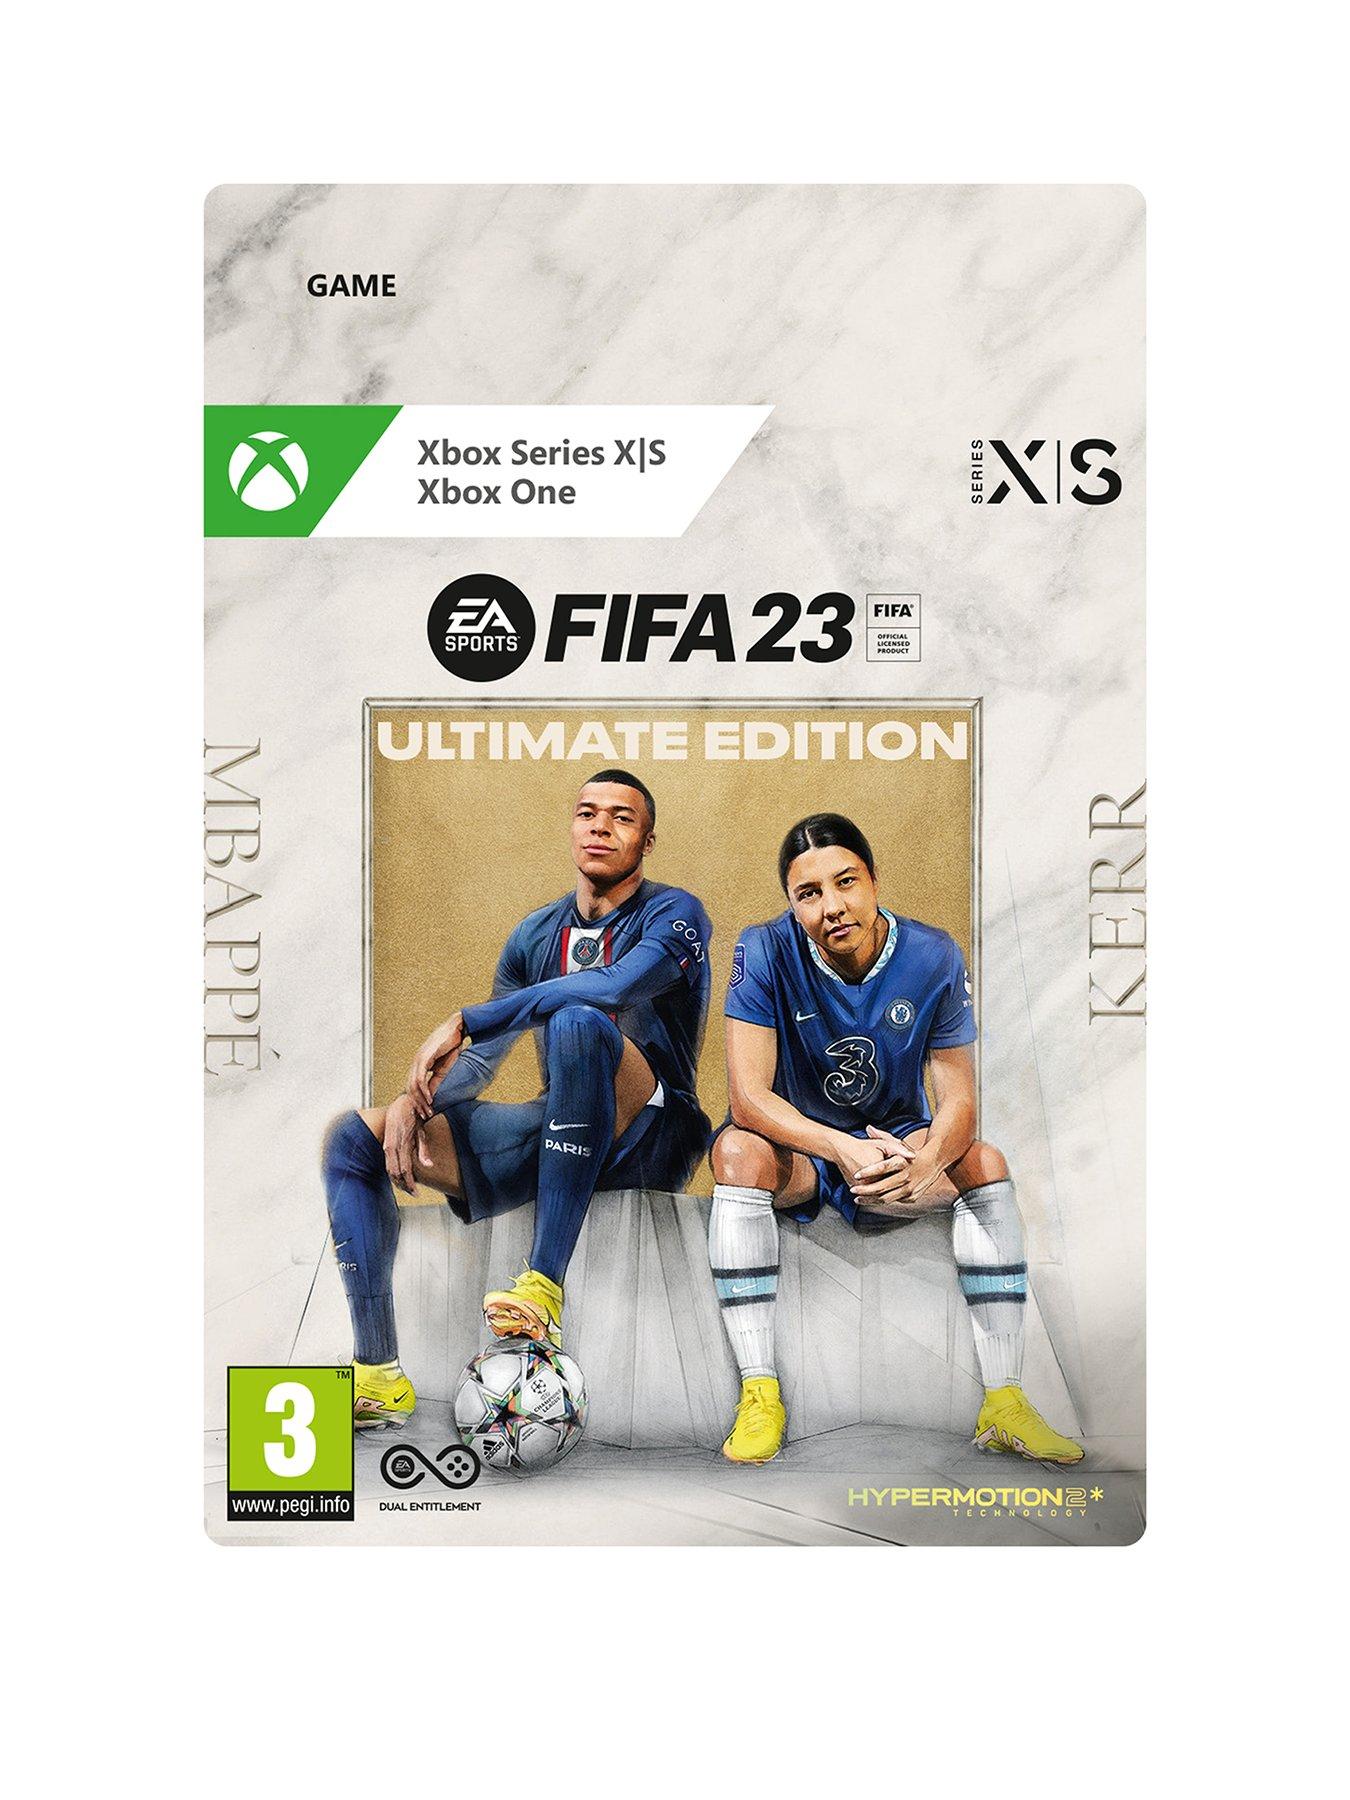 FIFA 23 Release Date: When is the new game coming out?